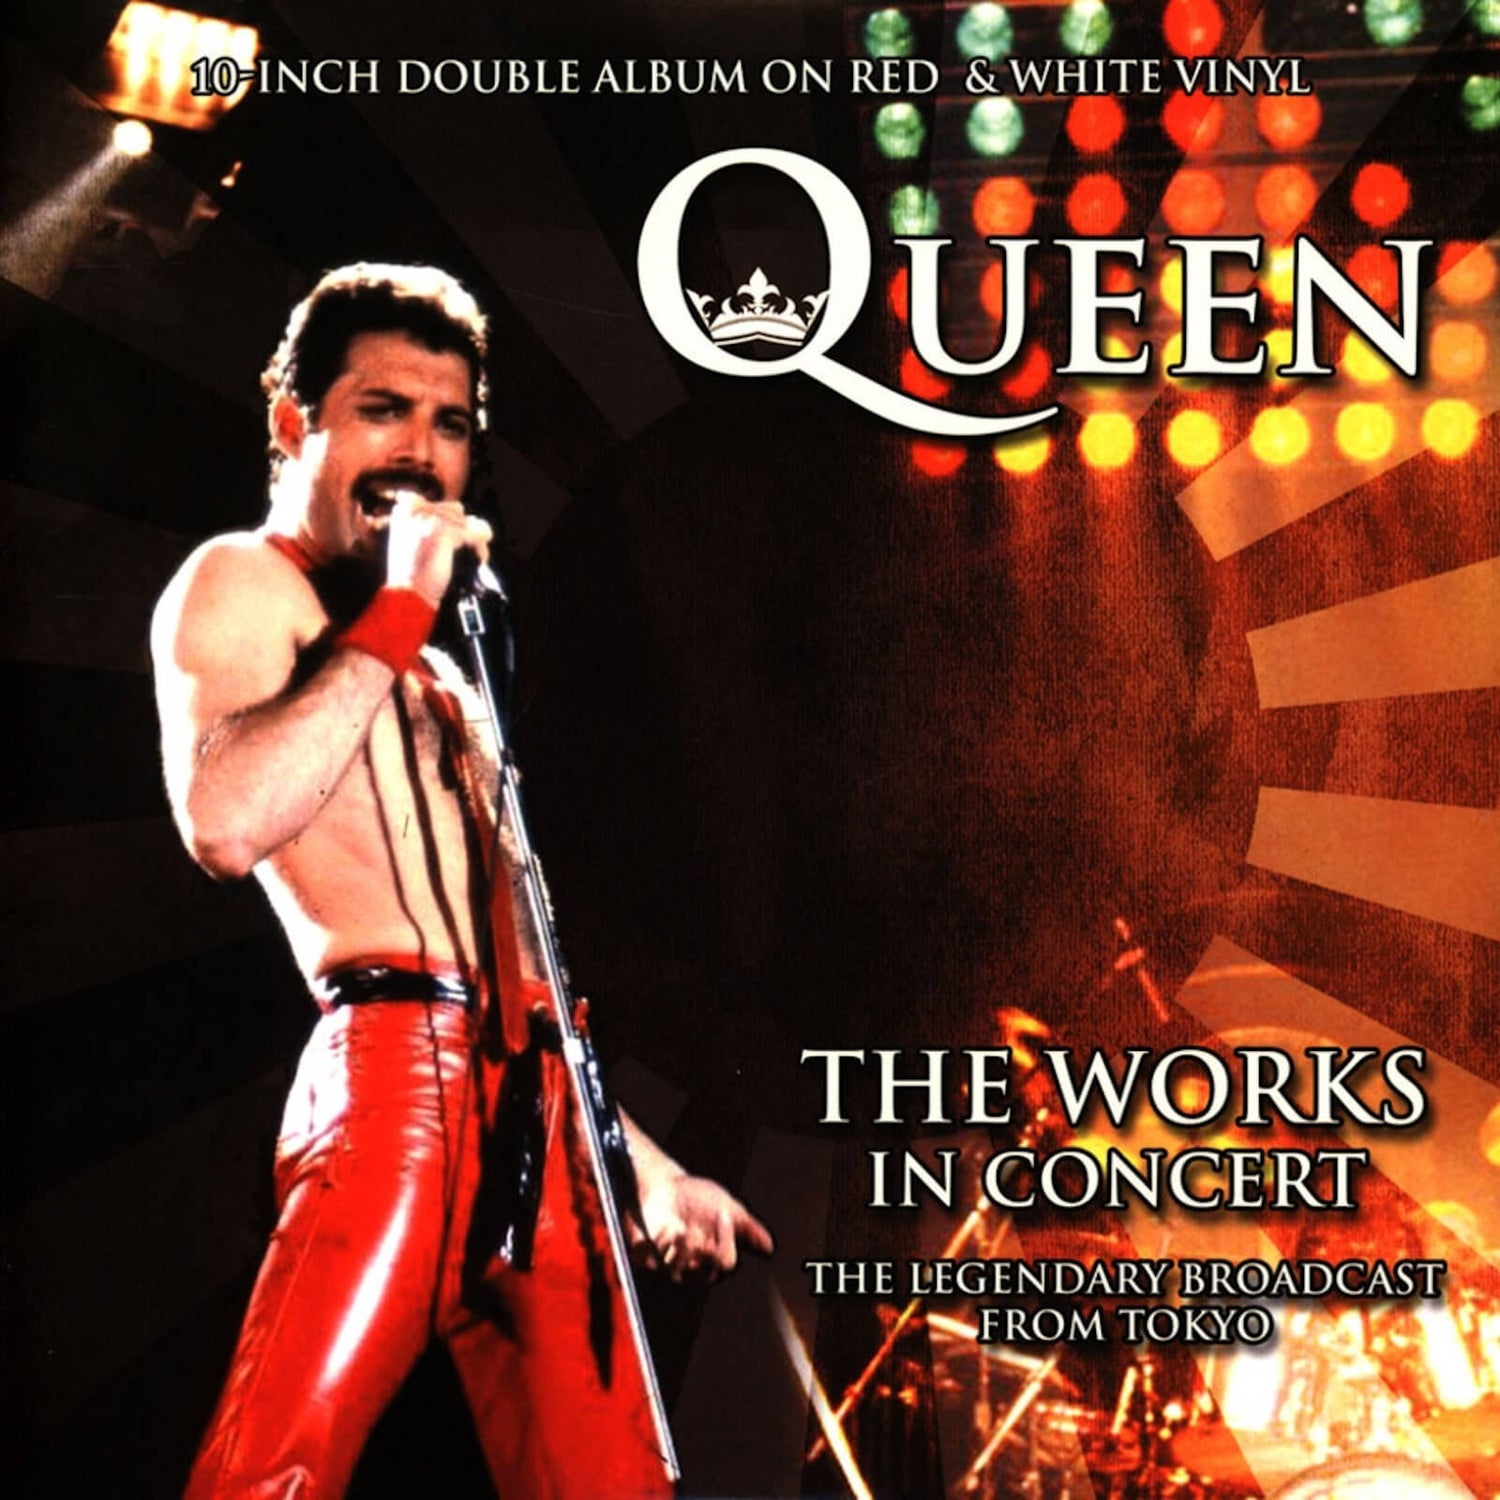 Queen - The Works In Concert (Red & White Vinyl) 2x10"